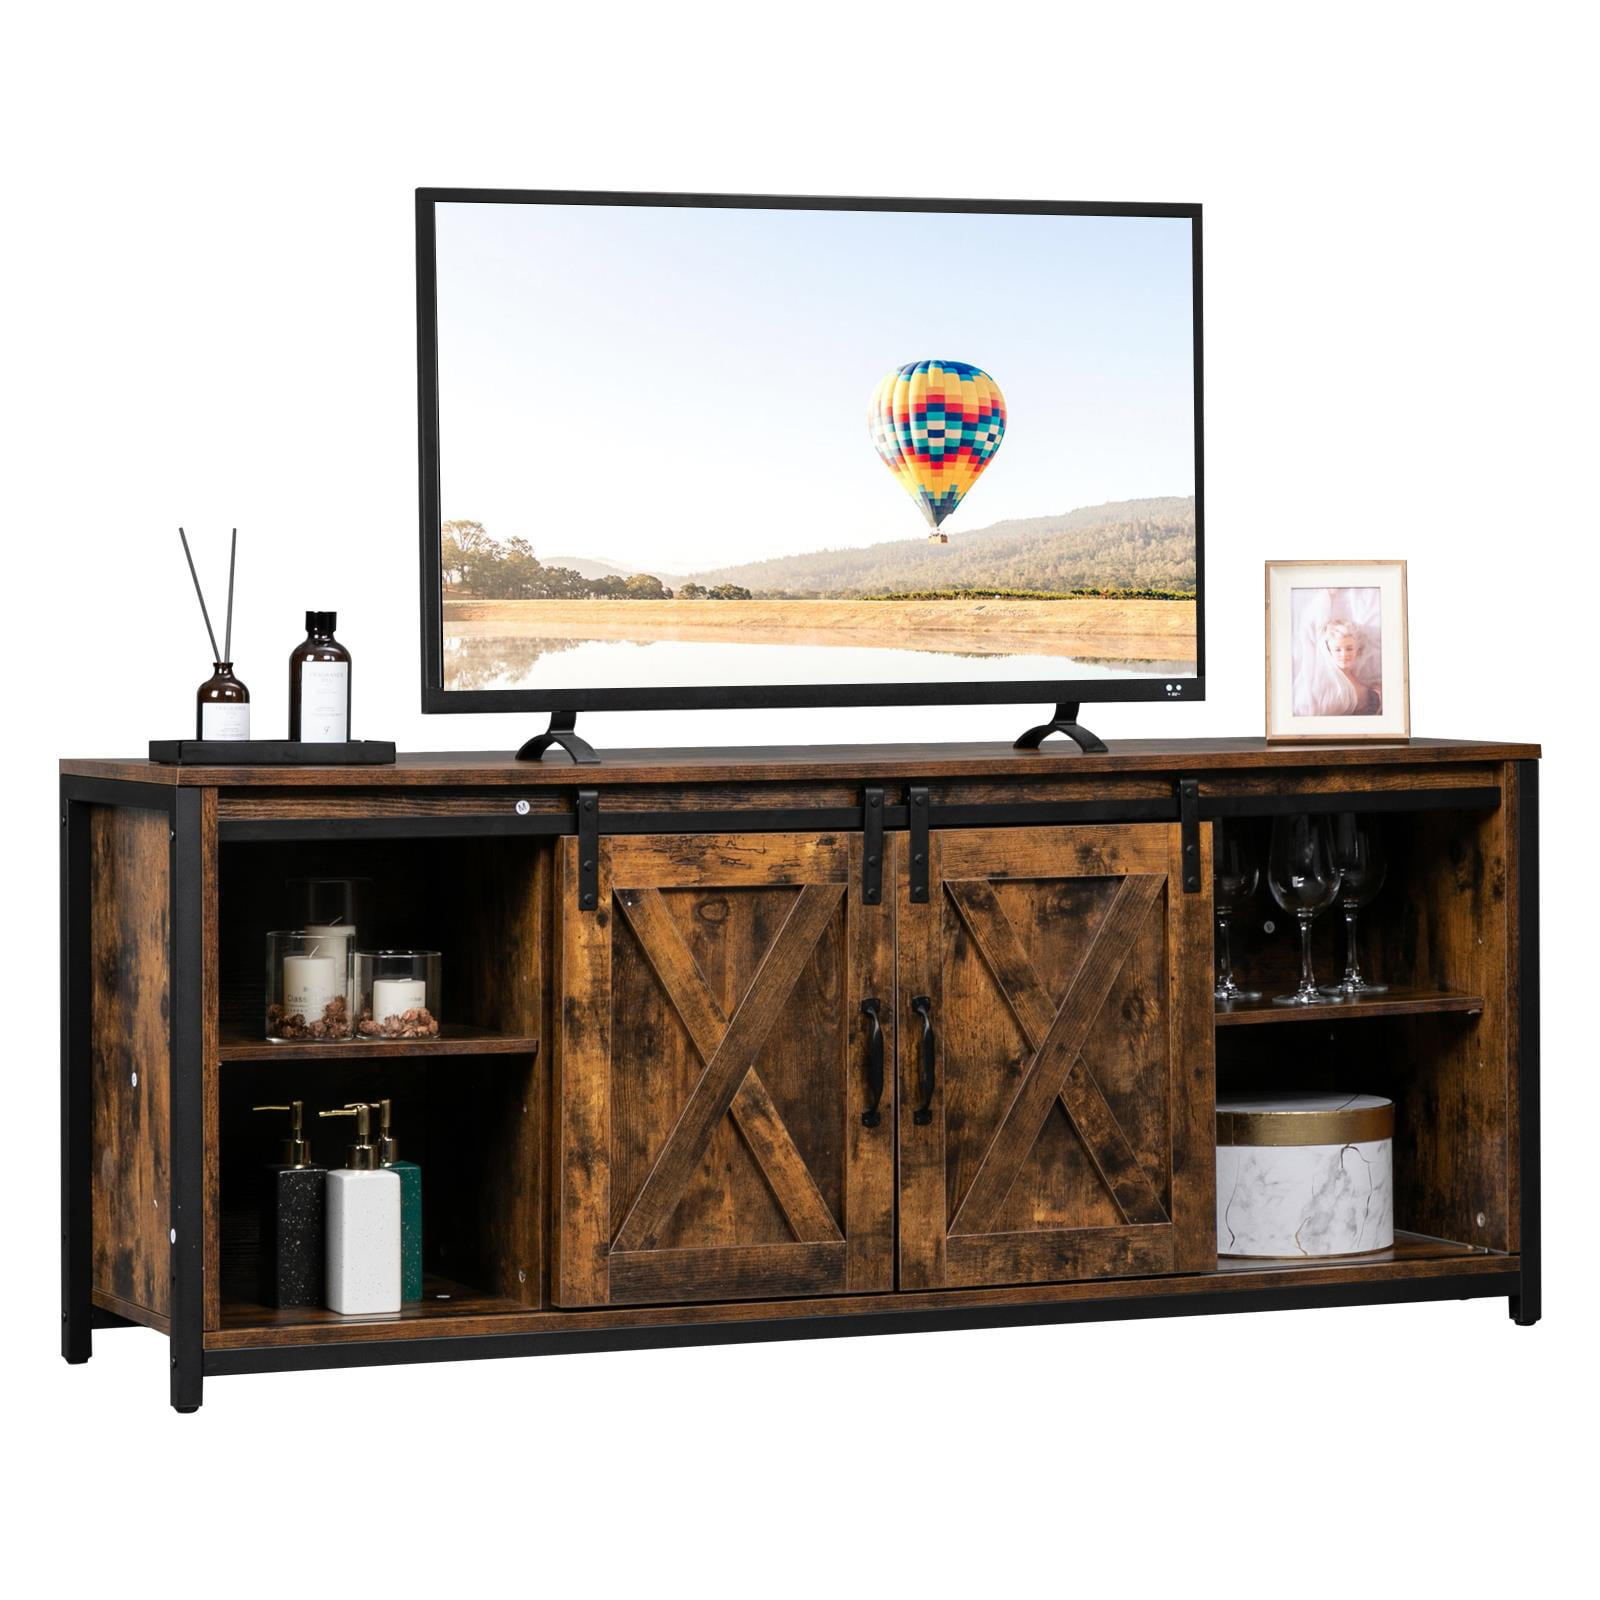 Rustic Wood Glass Tv Stand Weathered Storage Cabinet Shelves Media Center Table 